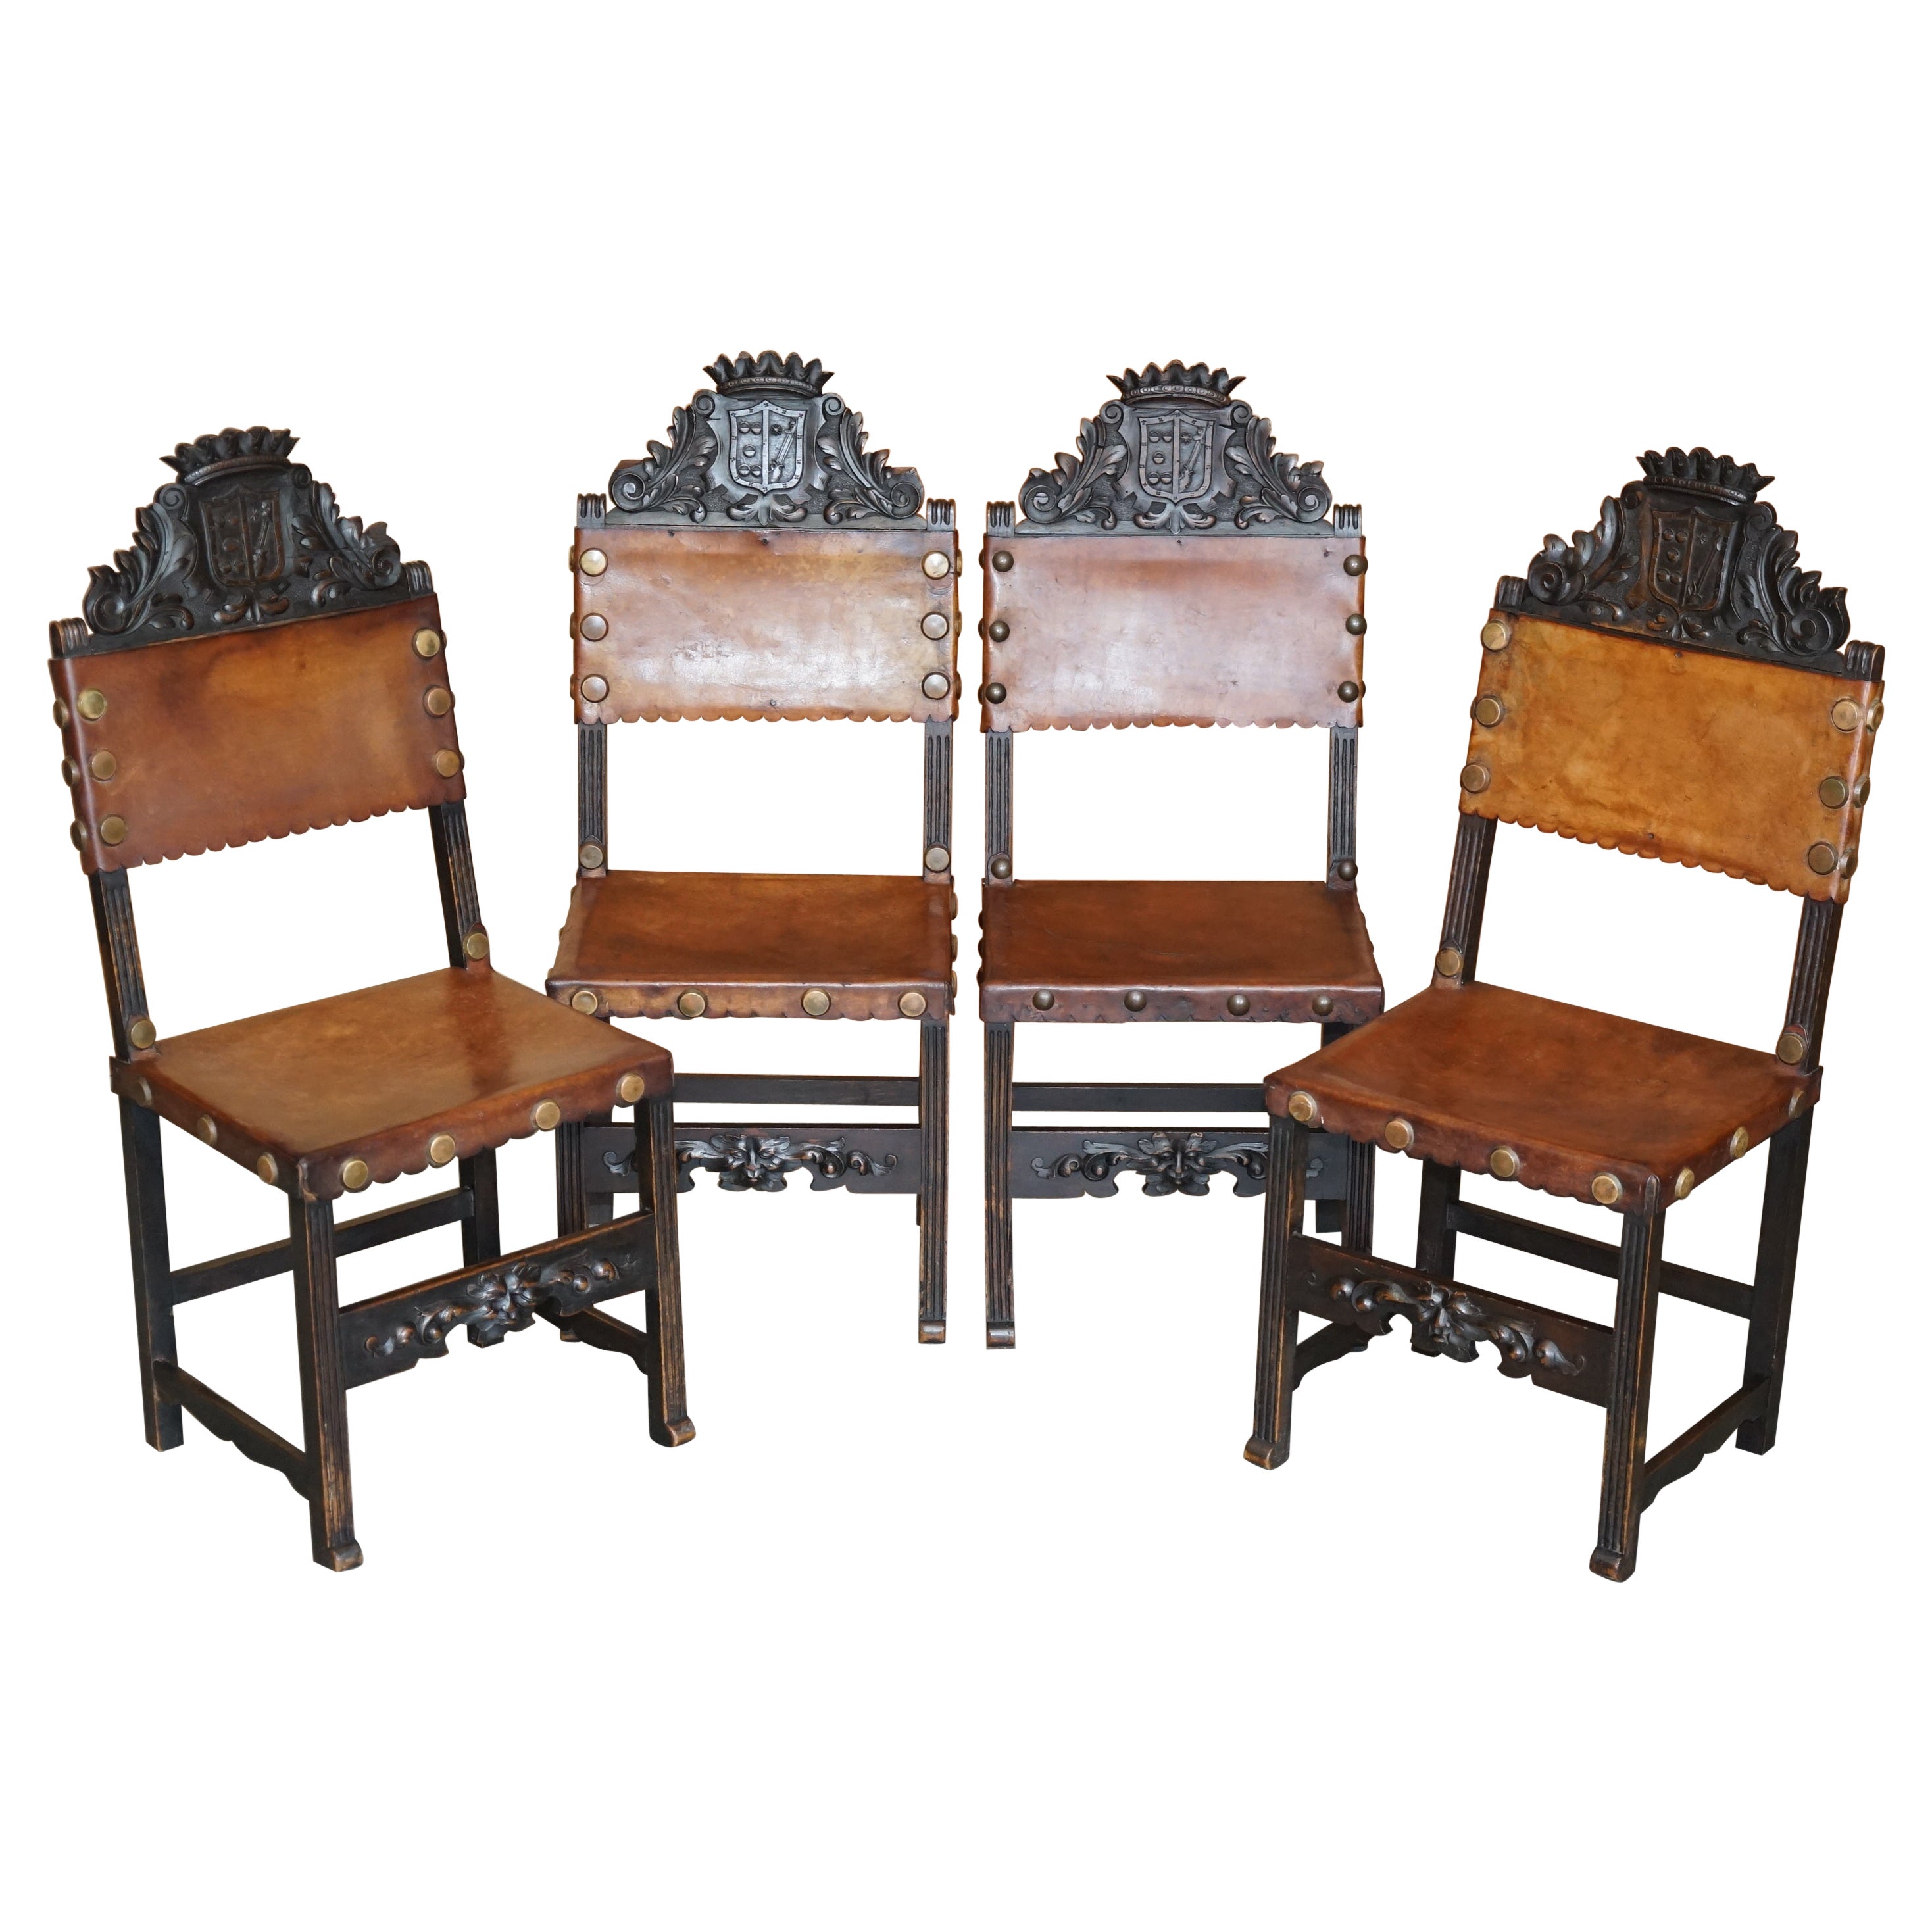 4 Victorian Oak Carved Dining Chairs Armorial Crest Coat of Arms Brown Leather